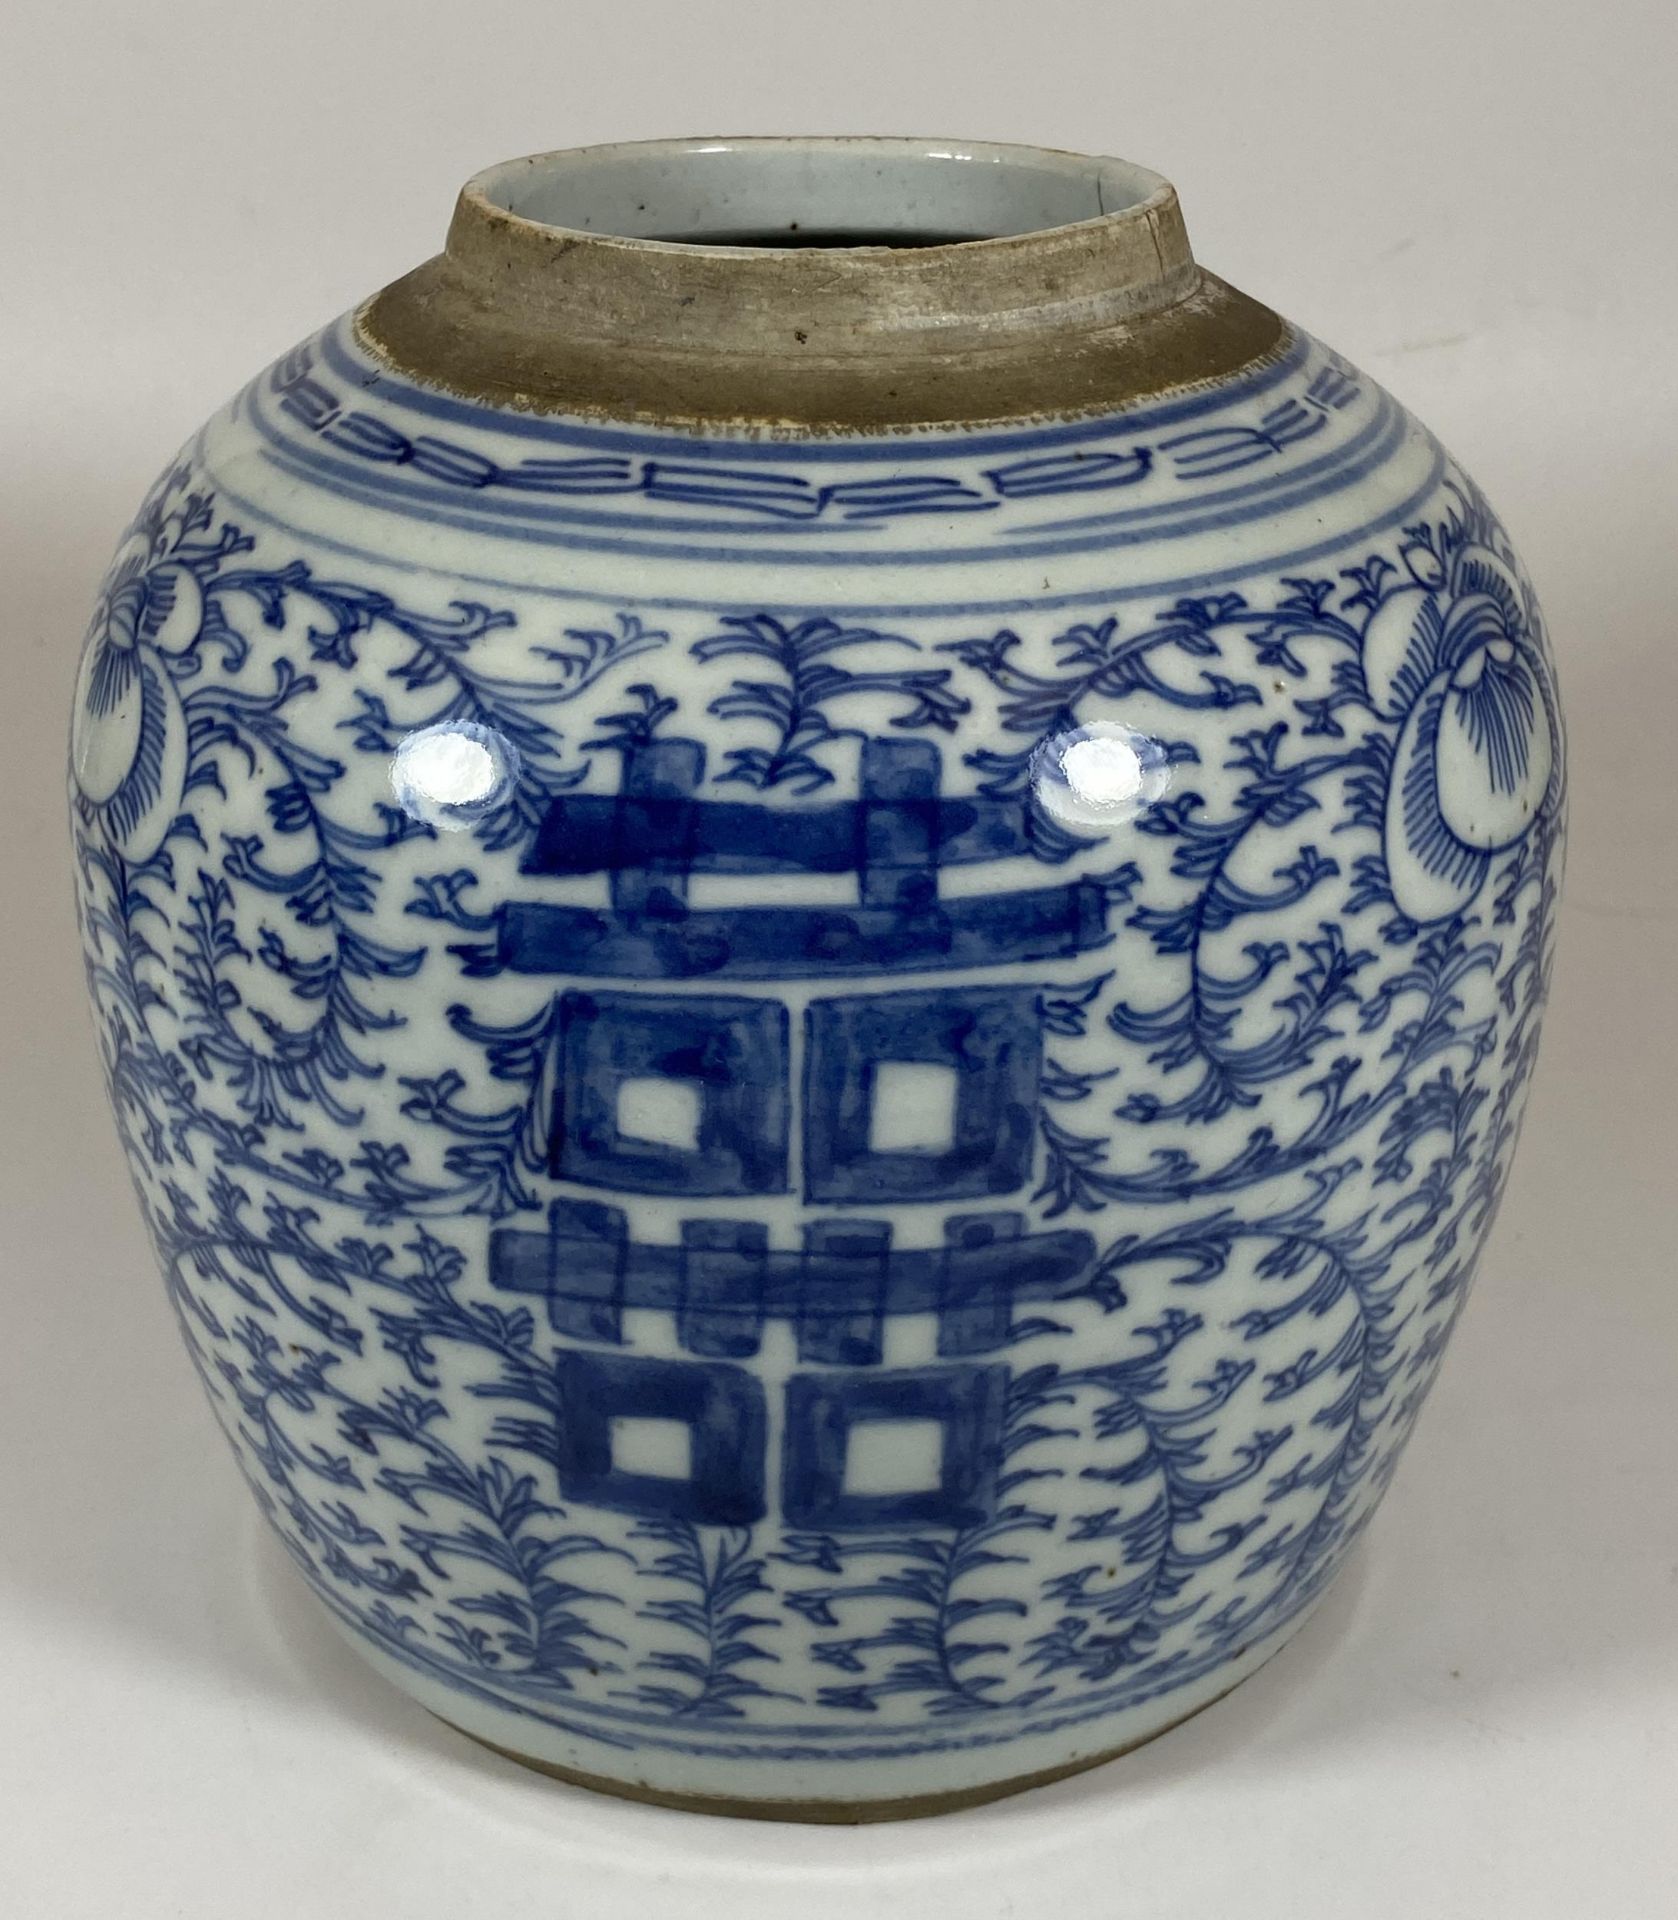 A 19TH CENTURY CHINESE QING BLUE AND WHITE PORCELAIN MARRIAGE GINGER JAR, HEIGHT 19CM